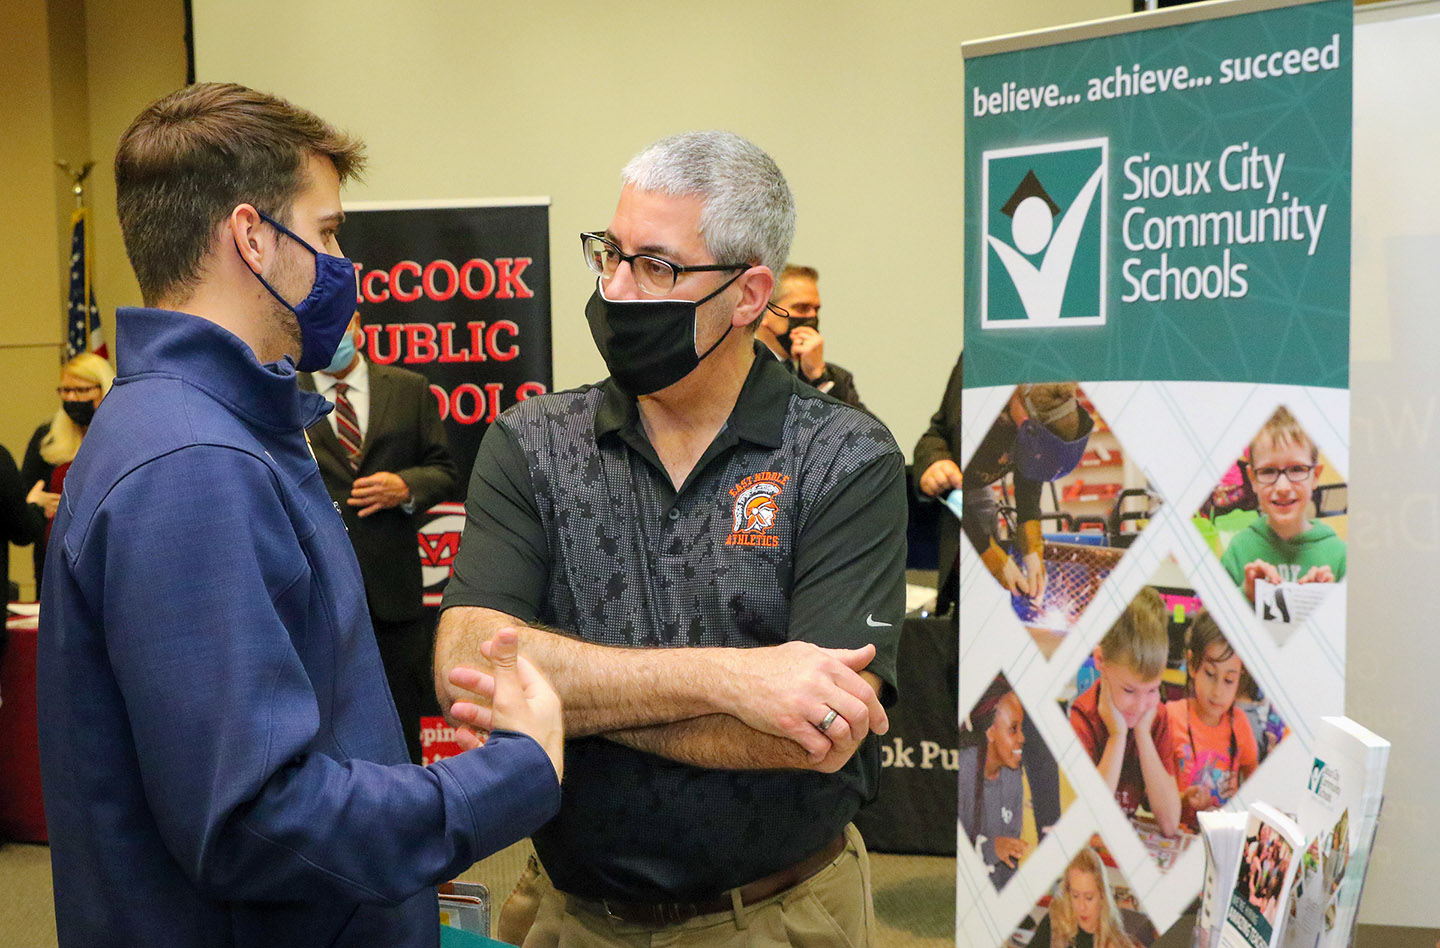 Sioux City East Middle School Principal Tom McGuire, right, discusses job opportunities with a UNK student during Thursday’s education career fair. (Photos by Todd Gottula, UNK Communications)